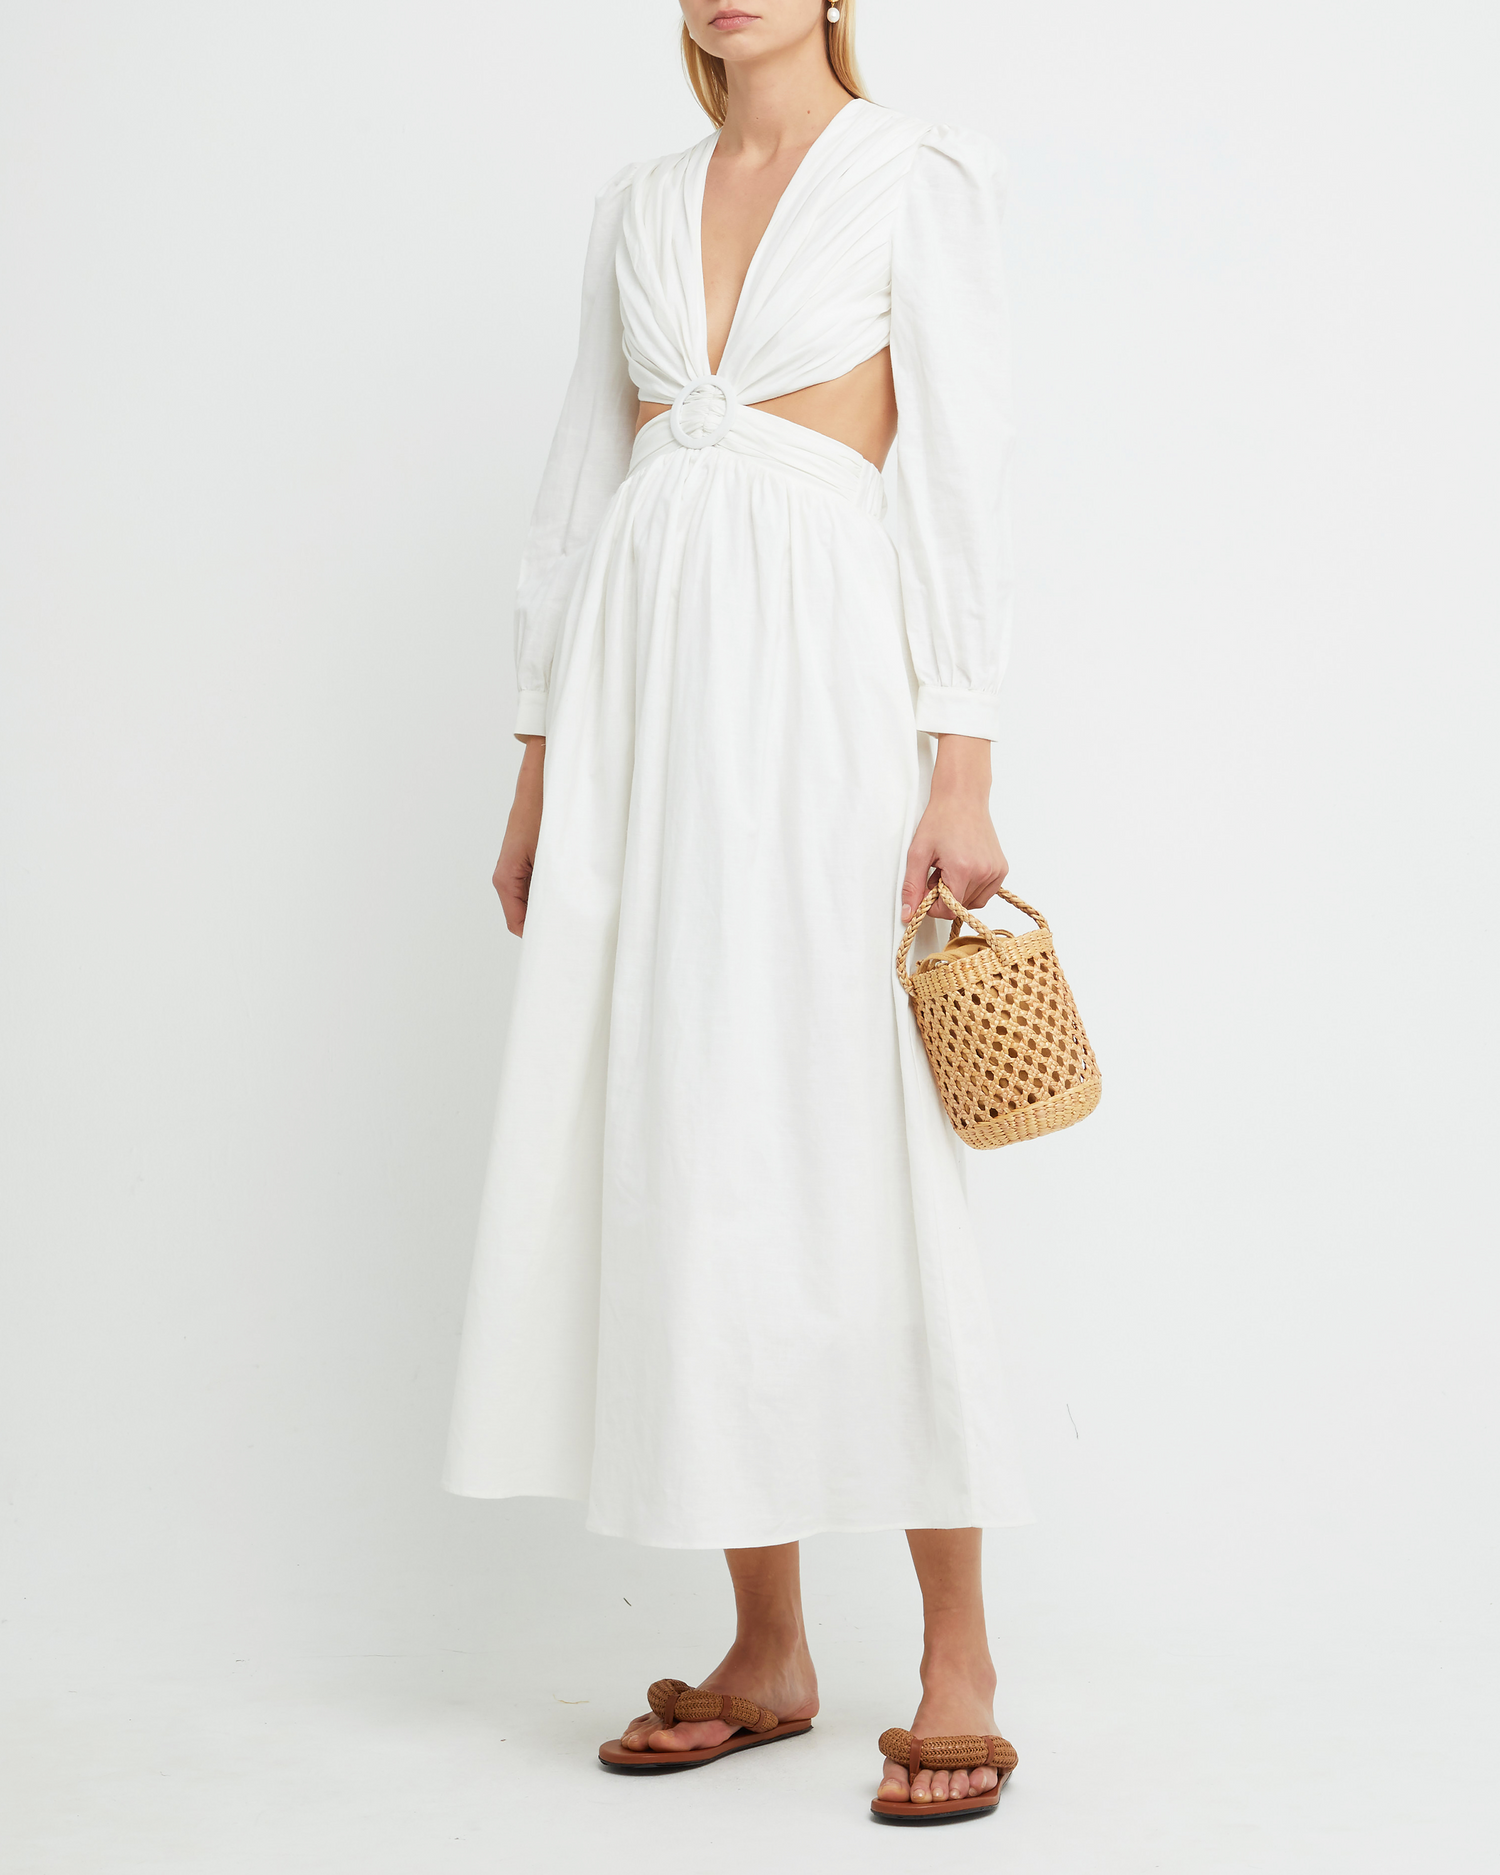 First image of Kimia Dress, a white maxi dress, belt, cut out, open back, long sleeves, V-neck, plunge